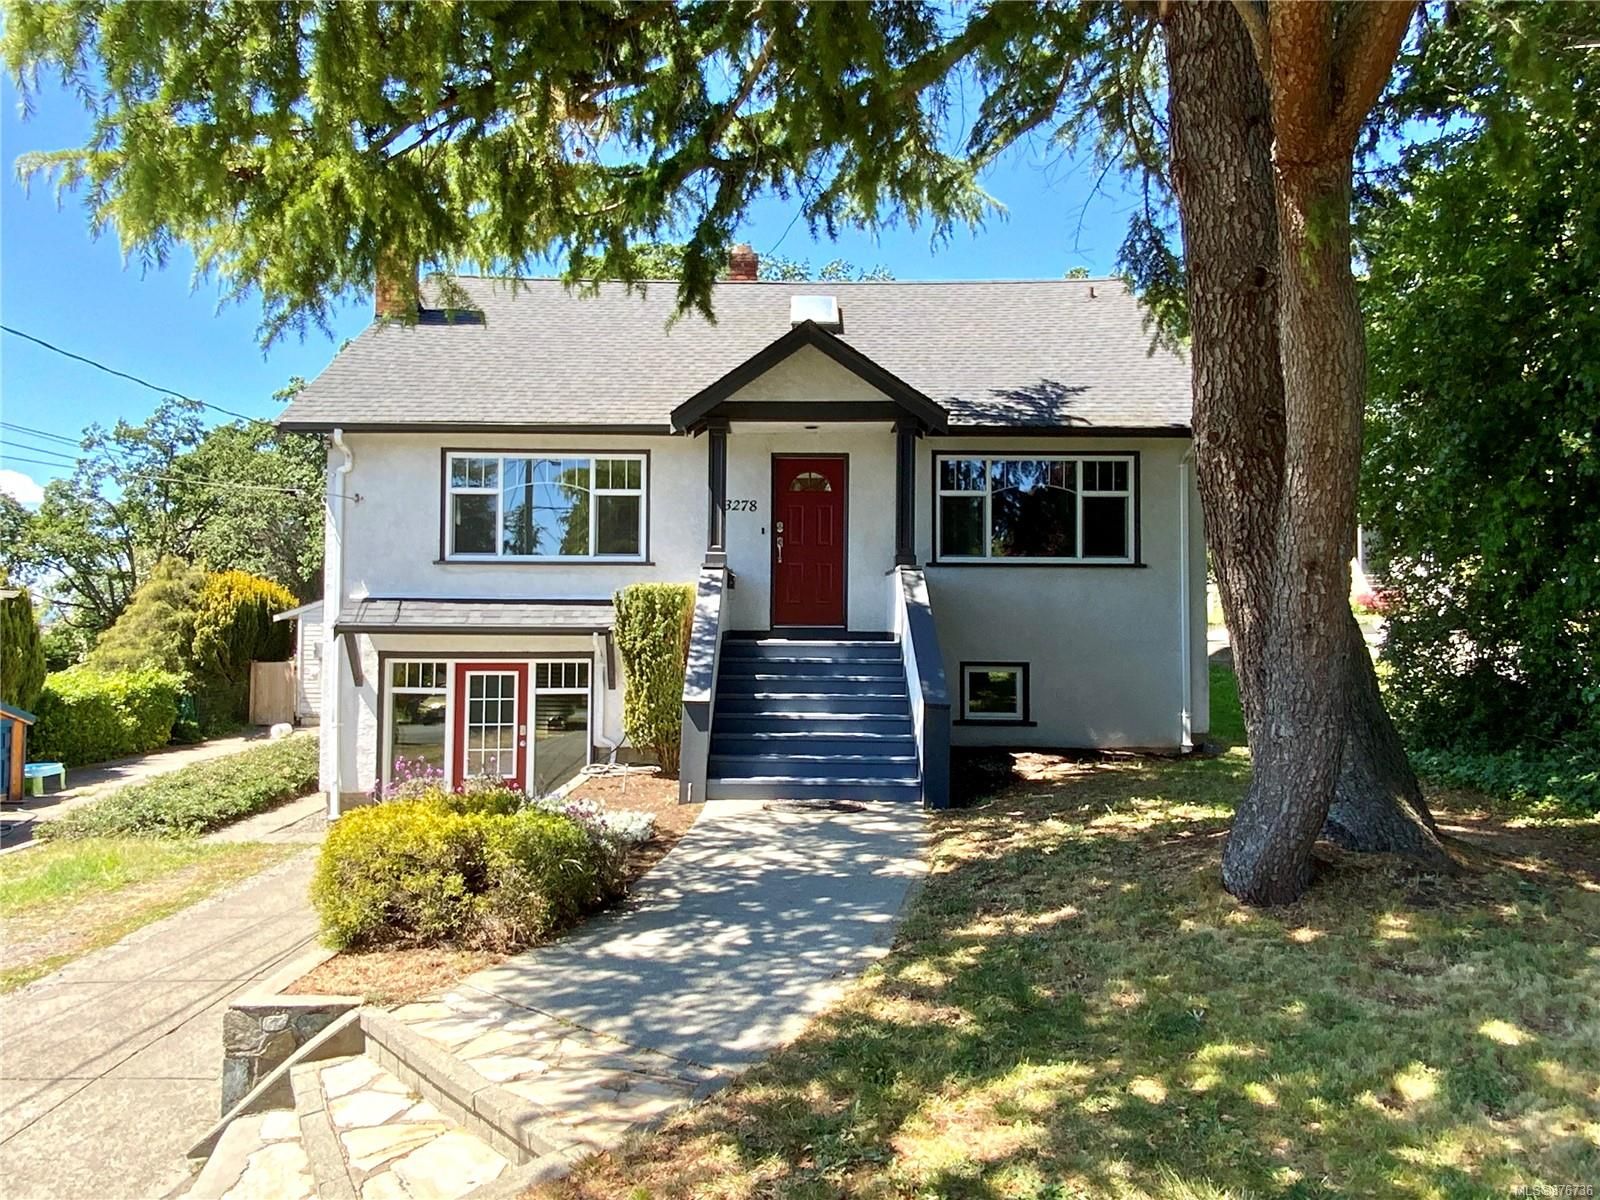 Main Photo: 3278 Wicklow St in Saanich: SE Maplewood House for sale (Saanich East)  : MLS®# 876736